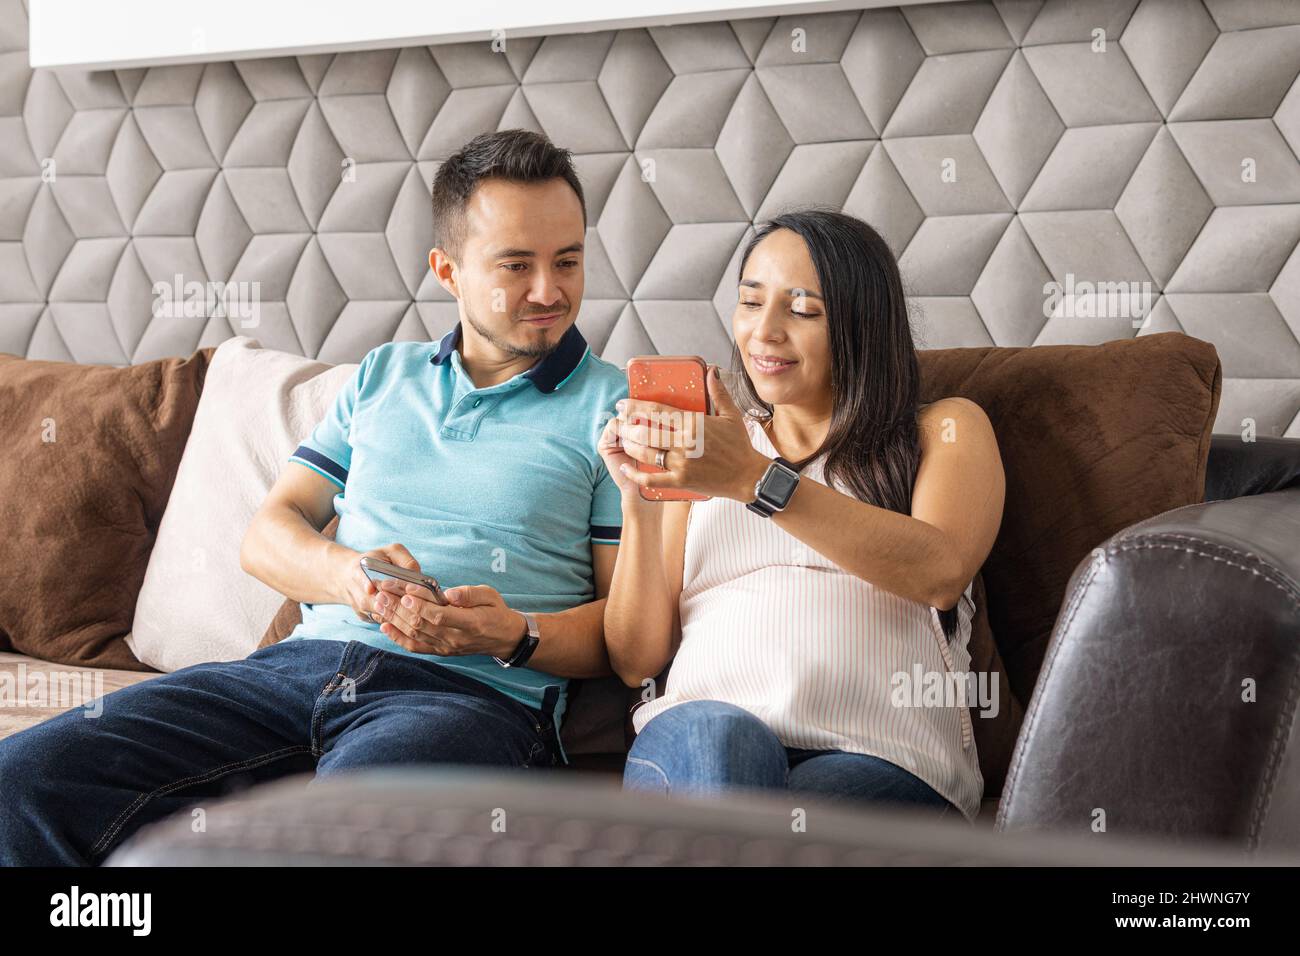 Couple of man and pregnant woman smiling using their smart phone in the living room of their house Stock Photo